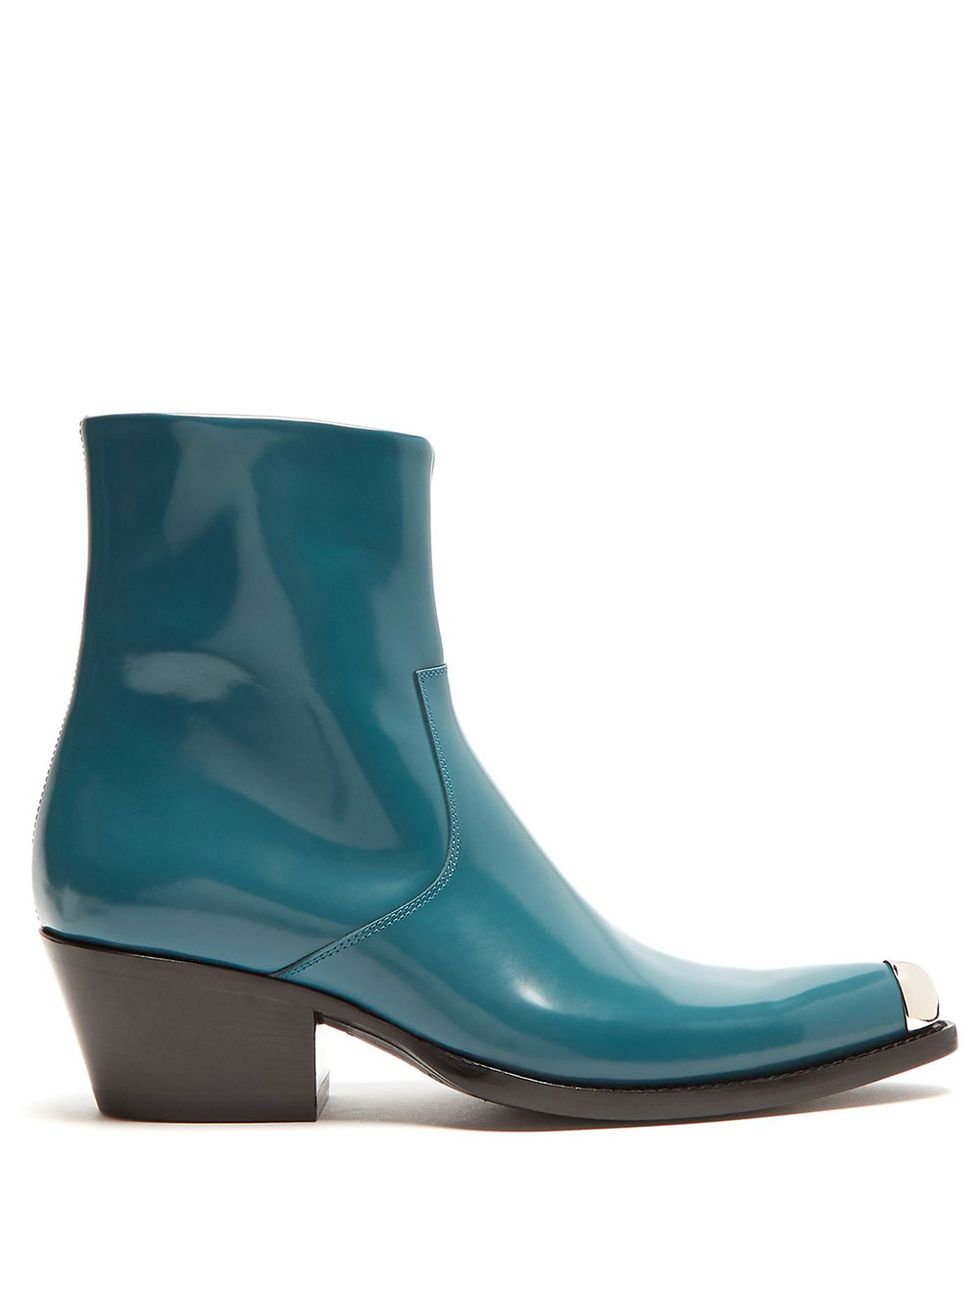 Footwear, Boot, Shoe, Turquoise, Teal, Aqua, Turquoise, Leather, Electric blue, Durango boot, 